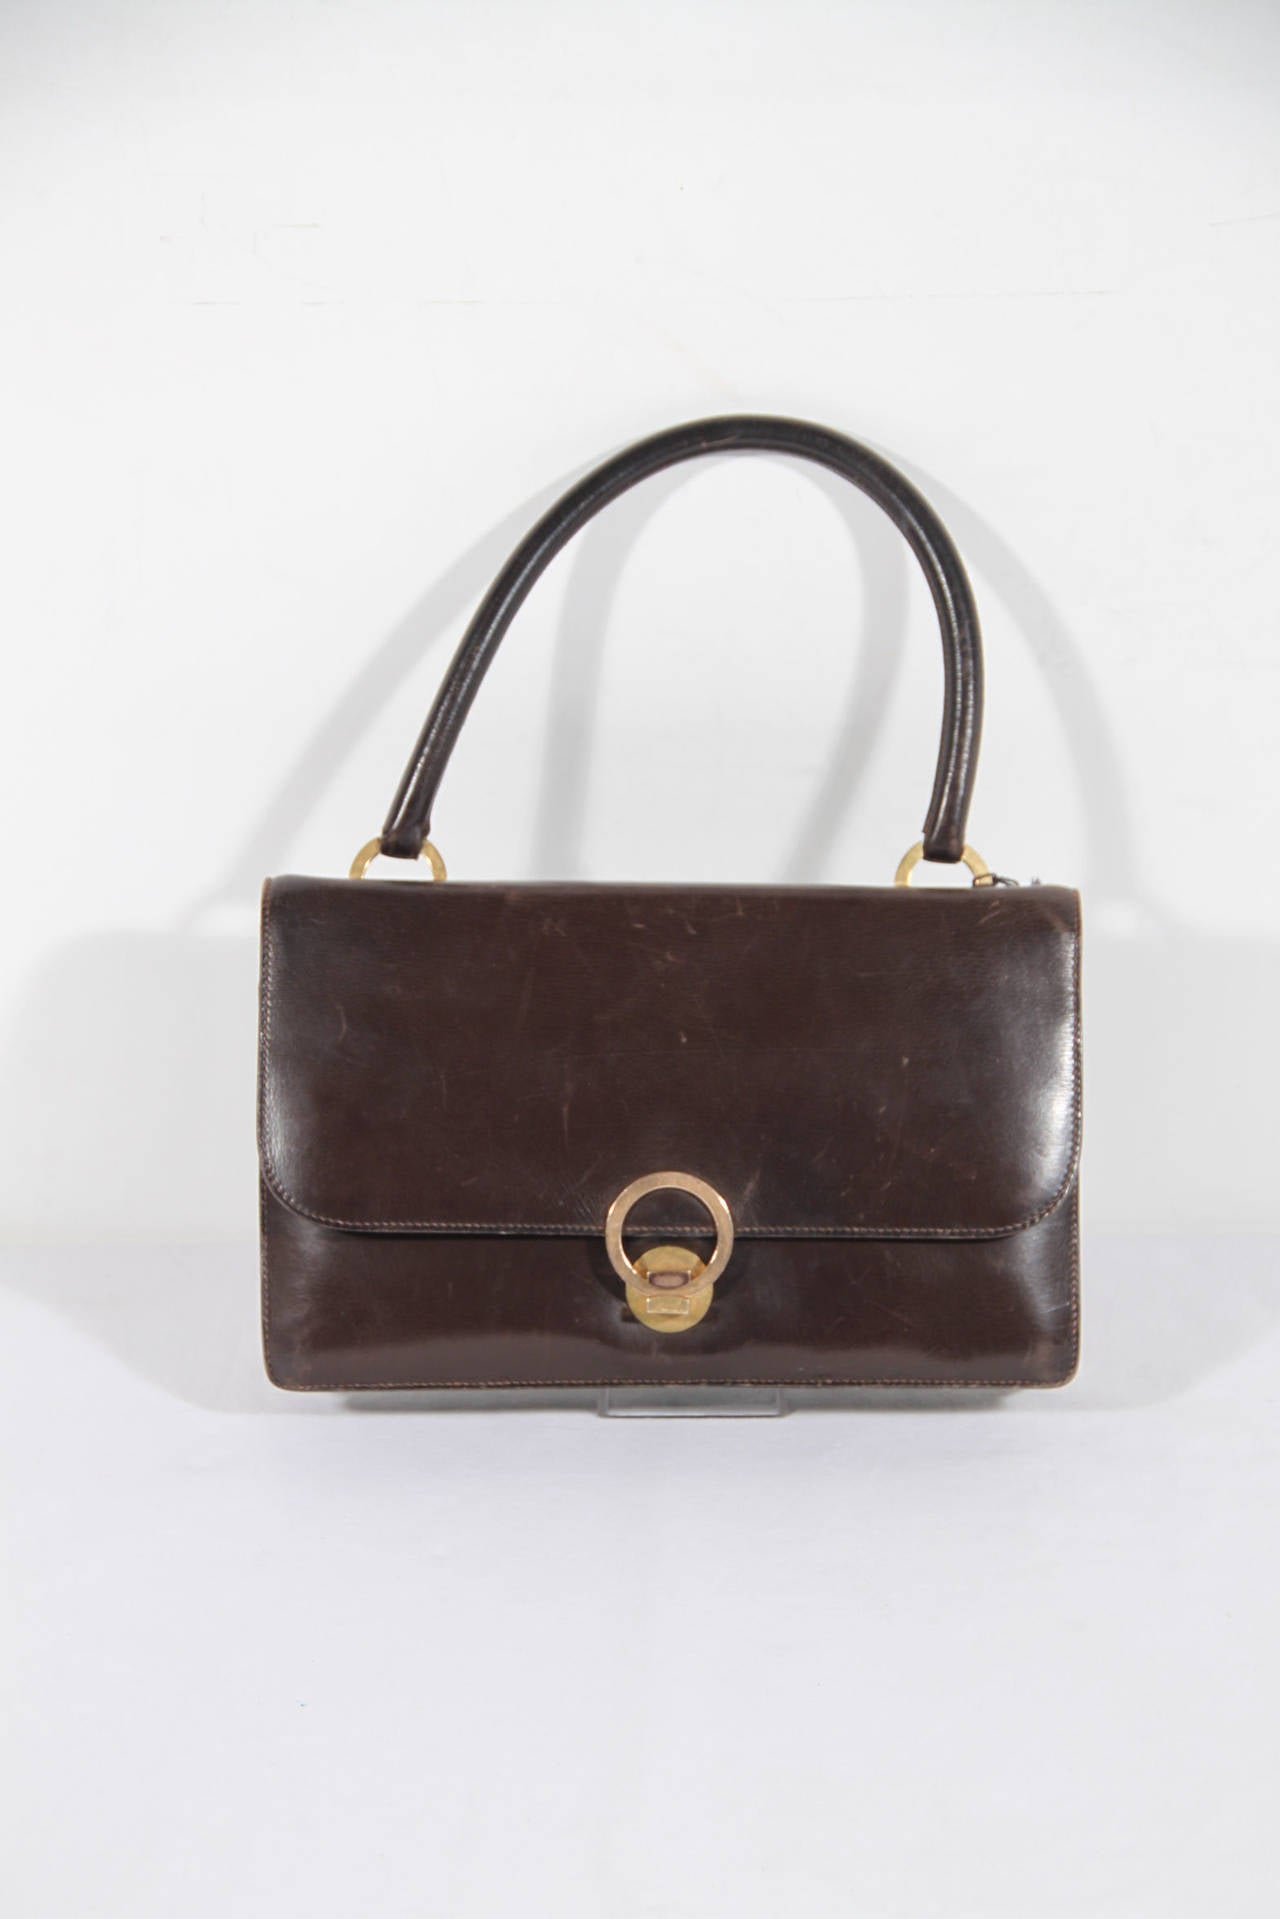 - Model: RING BAG

- Period/Era: Circa 1960

- Made from genuine brown leather

- Gold metal hardware

- Flap with clasp closure

- 1 open pocket on the front (under the flap)

- 2 main sections with 2 side flap pocket, 1 compartment